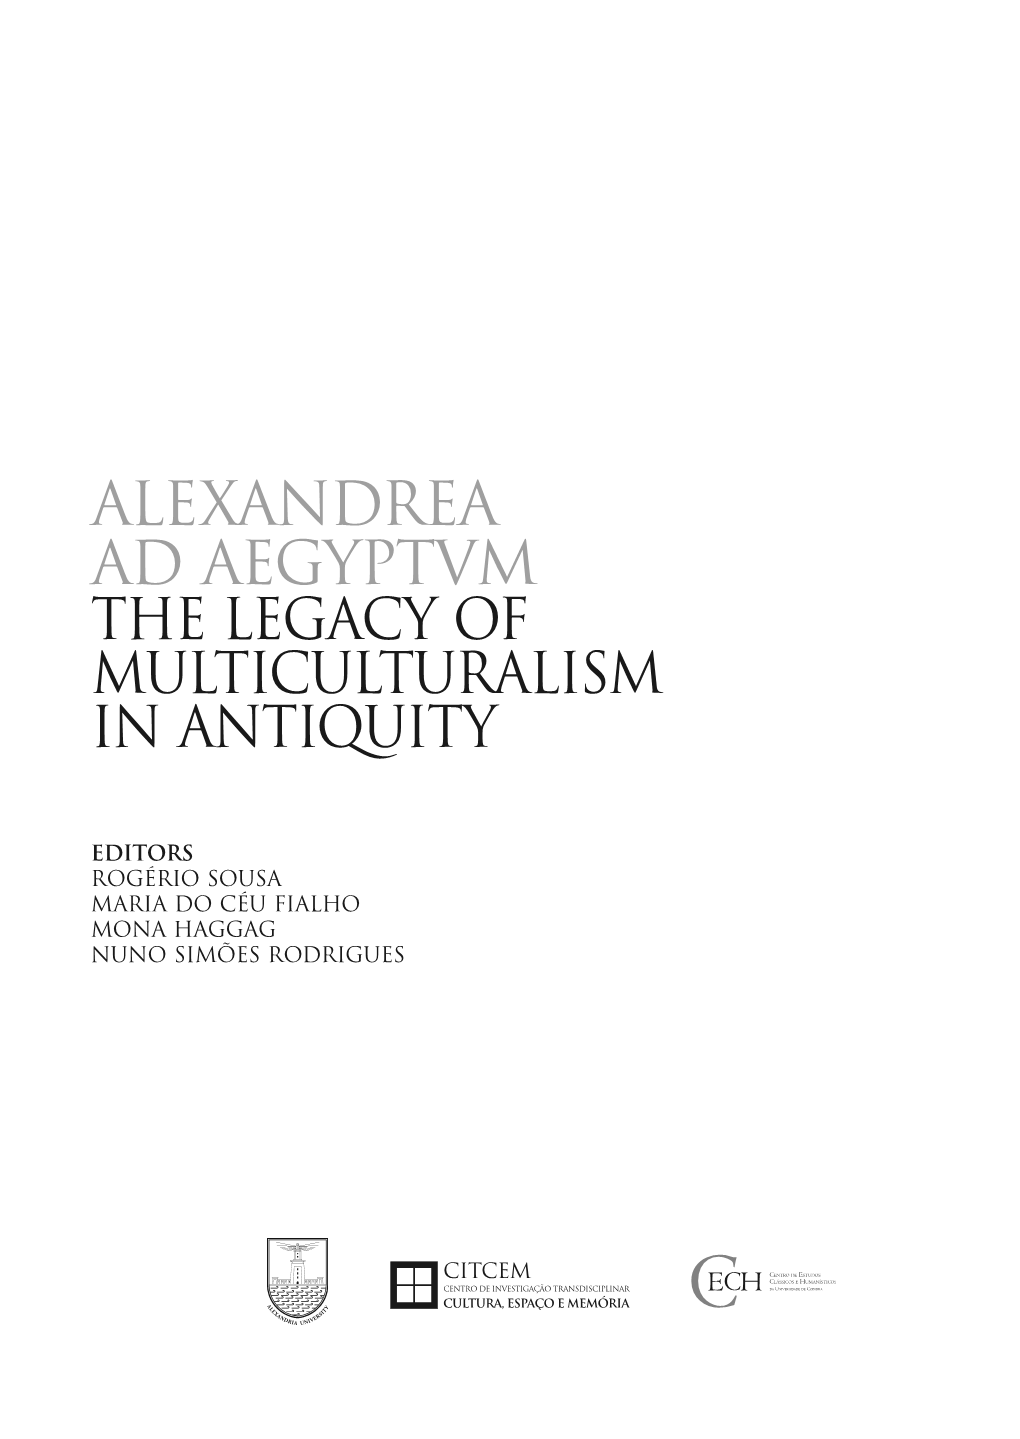 Alexandrea Ad Aegyptvm the Legacy of Multiculturalism in Antiquity